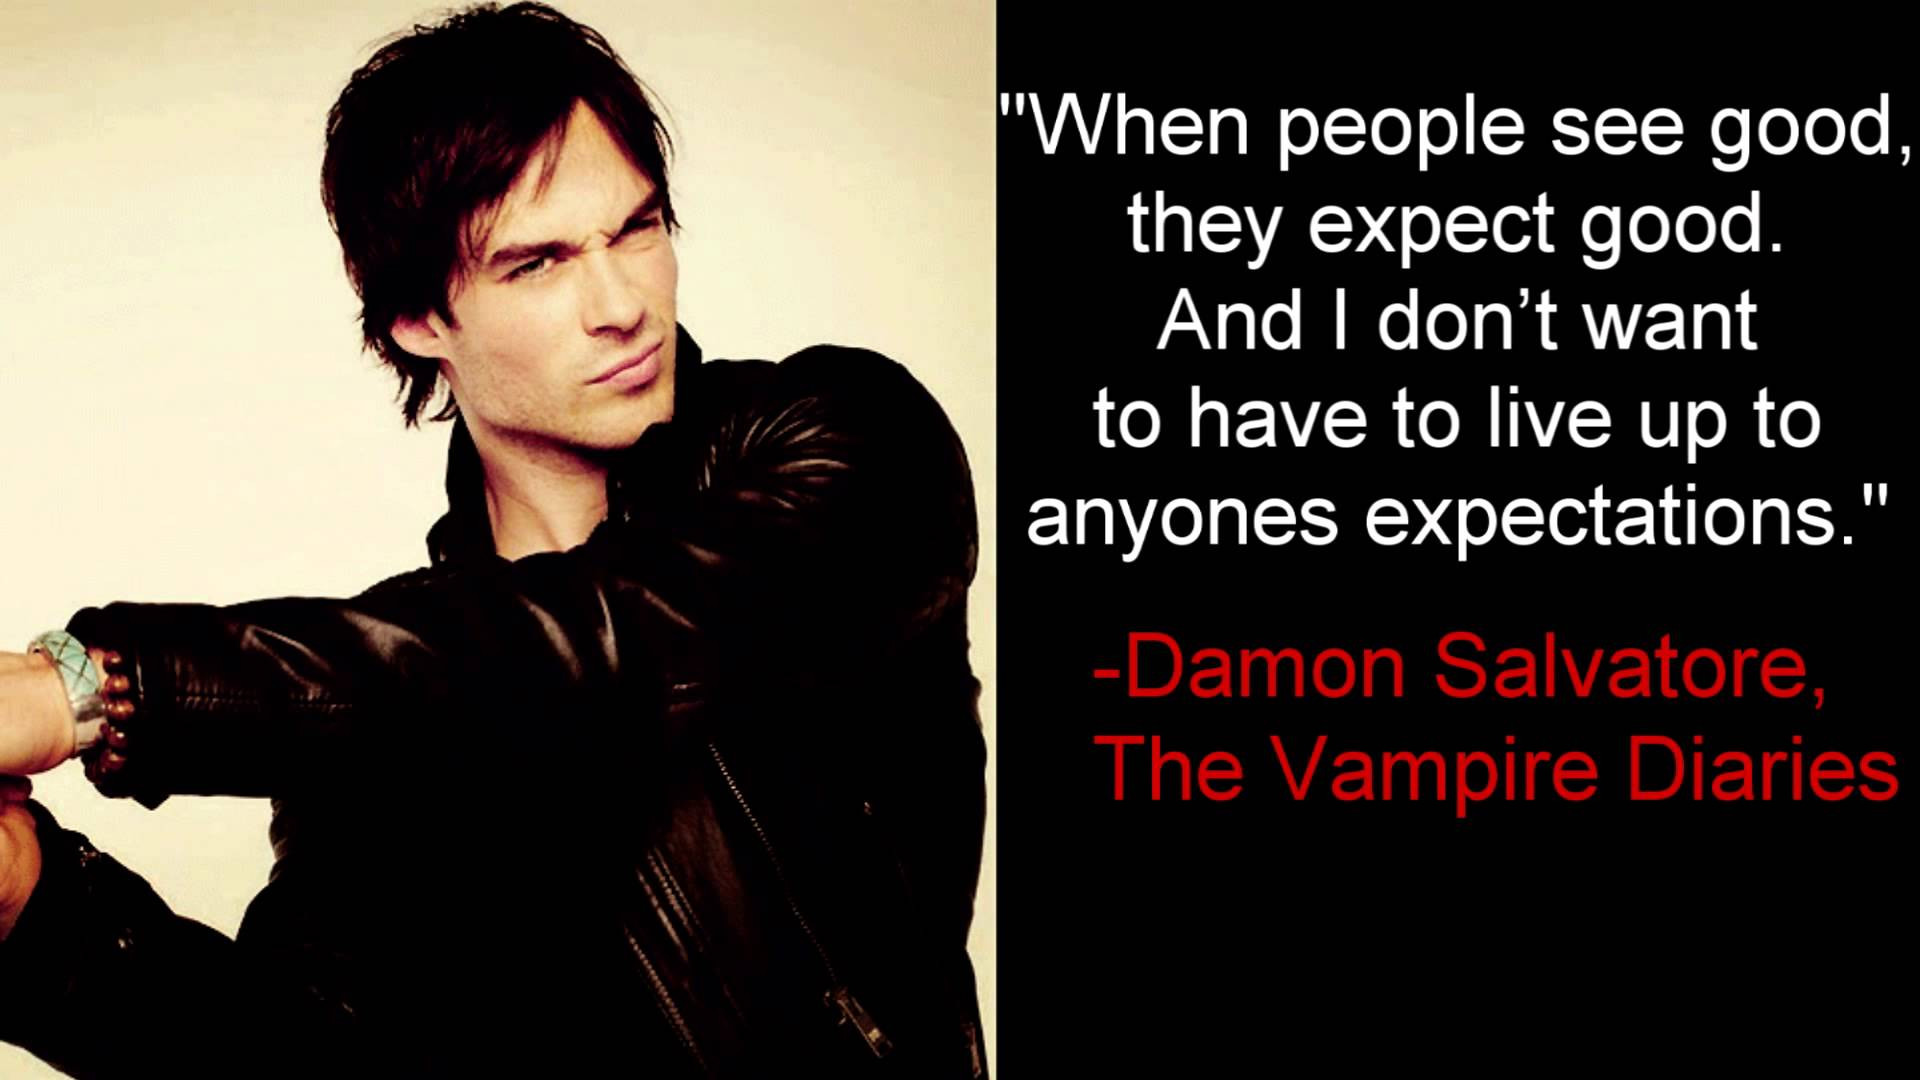 They like it when people. Фразы Деймона Сальваторе. Лусиане Дэймон. Damon Salvatore quotes. Деймон Сальваторе шутки.